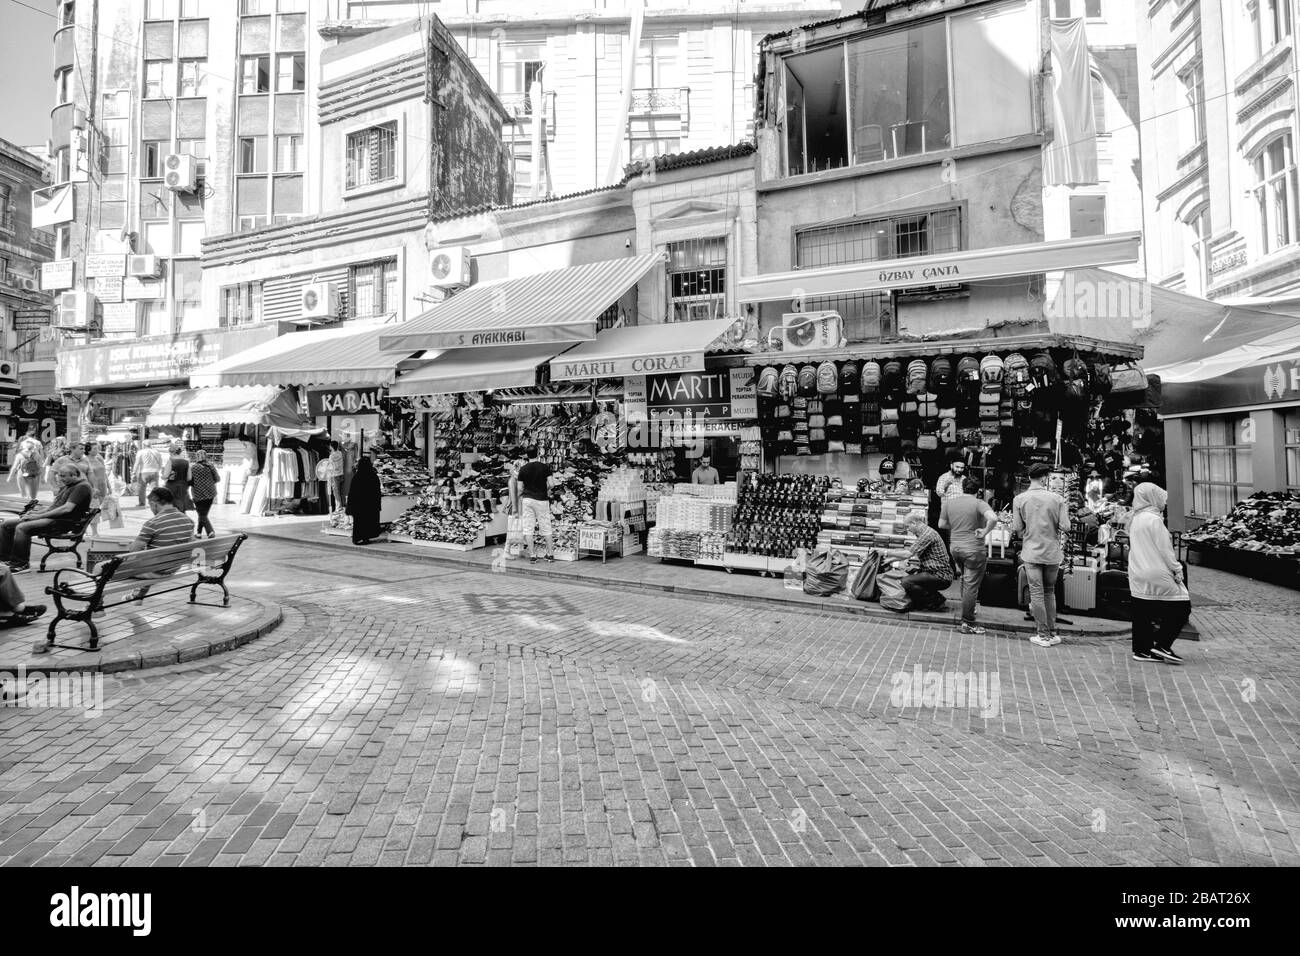 Istanbul, Turkey- September 21, 2017: Many citizens and tourists walking on a street in Istanbul full of typical shops Stock Photo